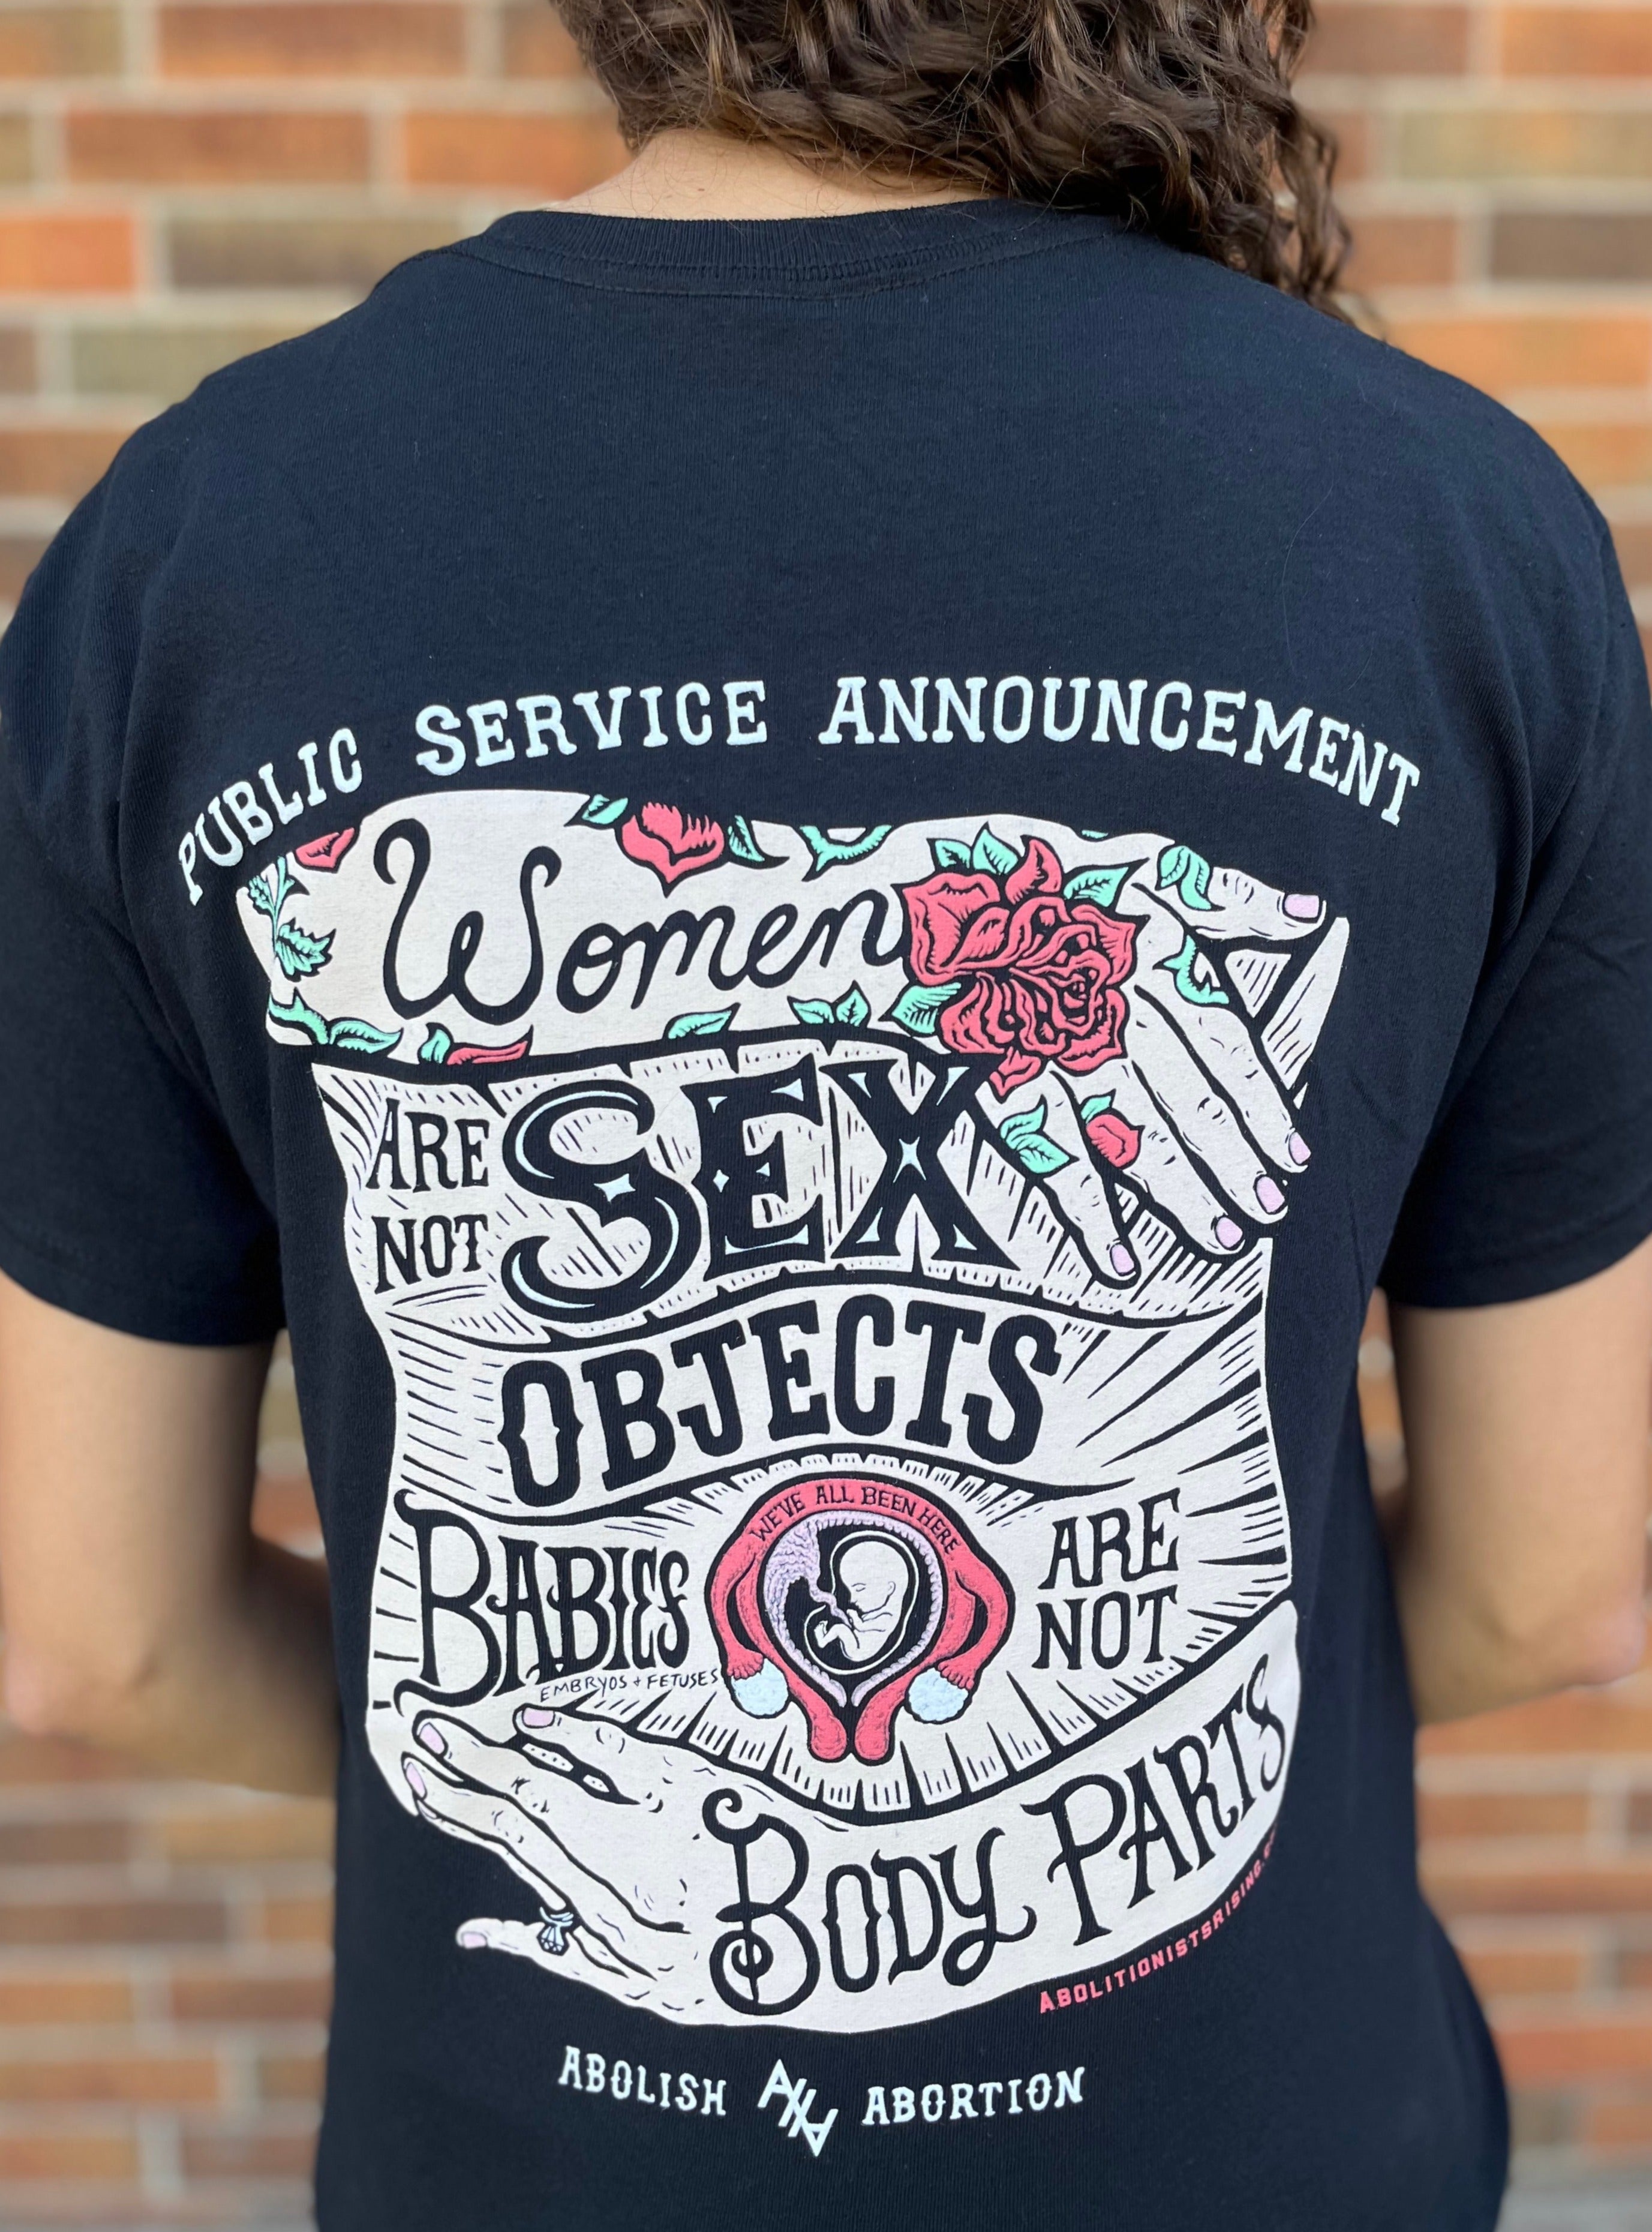 Women Are Not Sex Objects, Babies Are Not Body Parts T-Shirt (Unisex) & Dropcard bundle